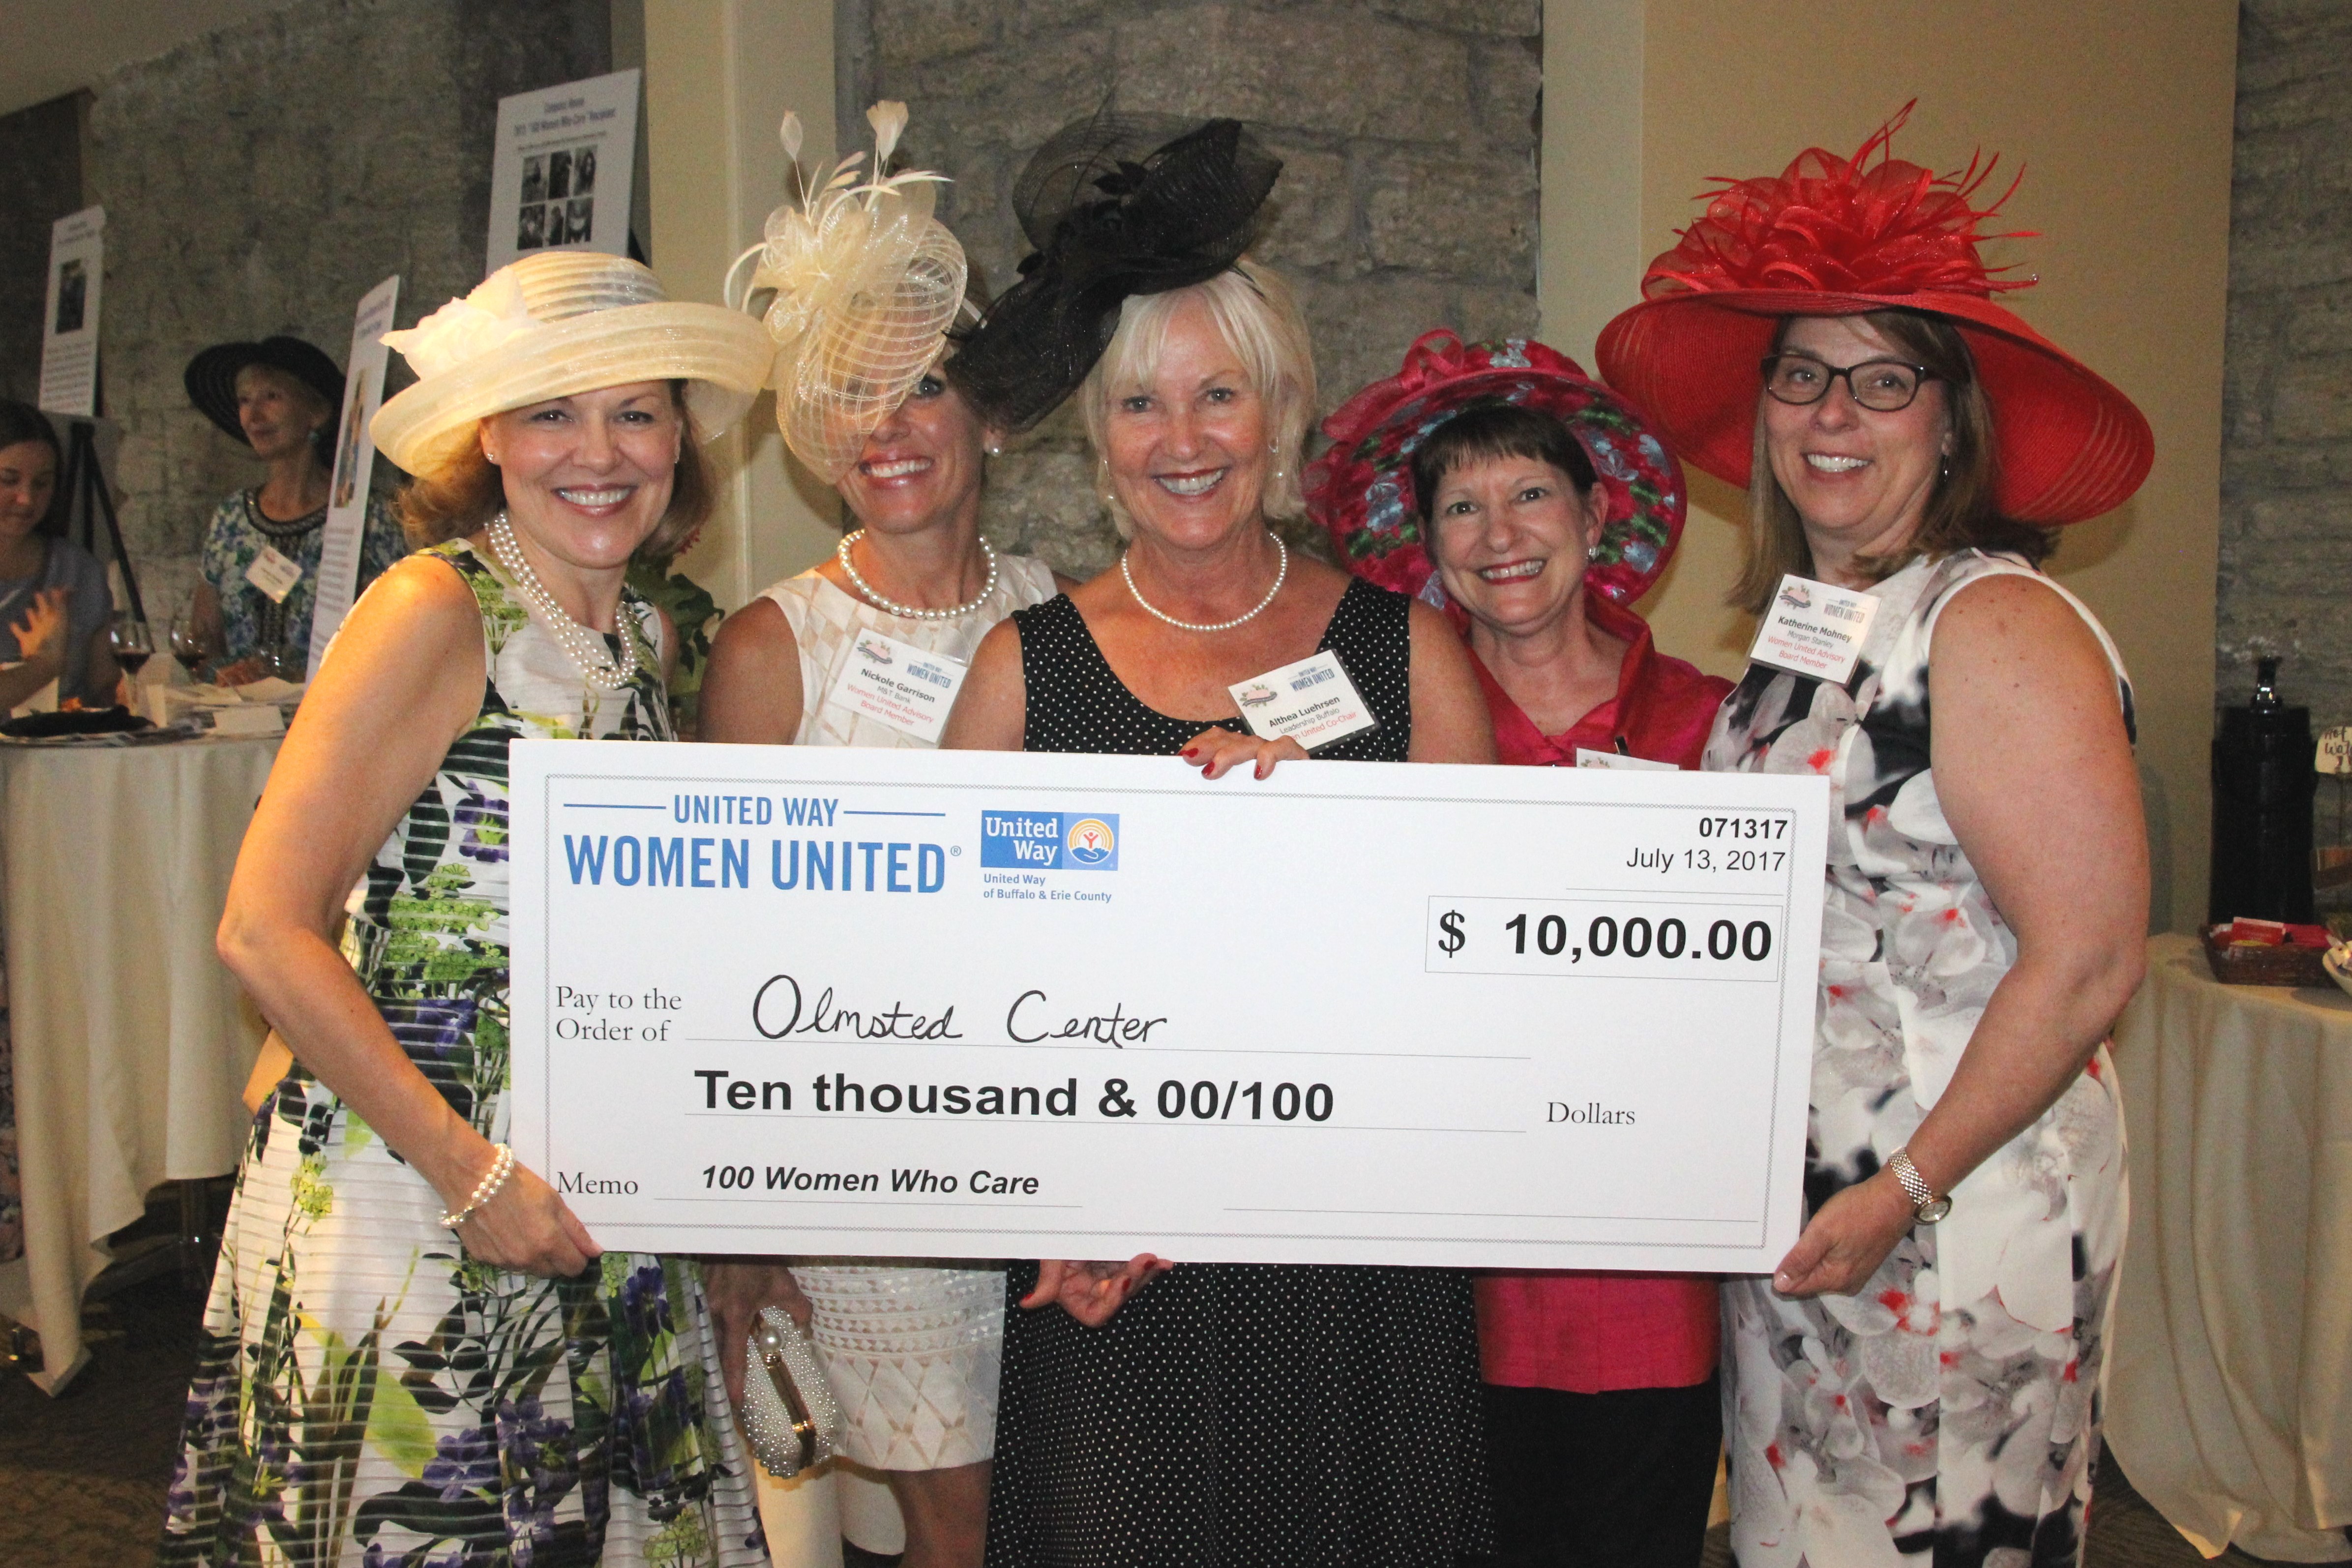 Five women united members holding a large donation check for $10,000